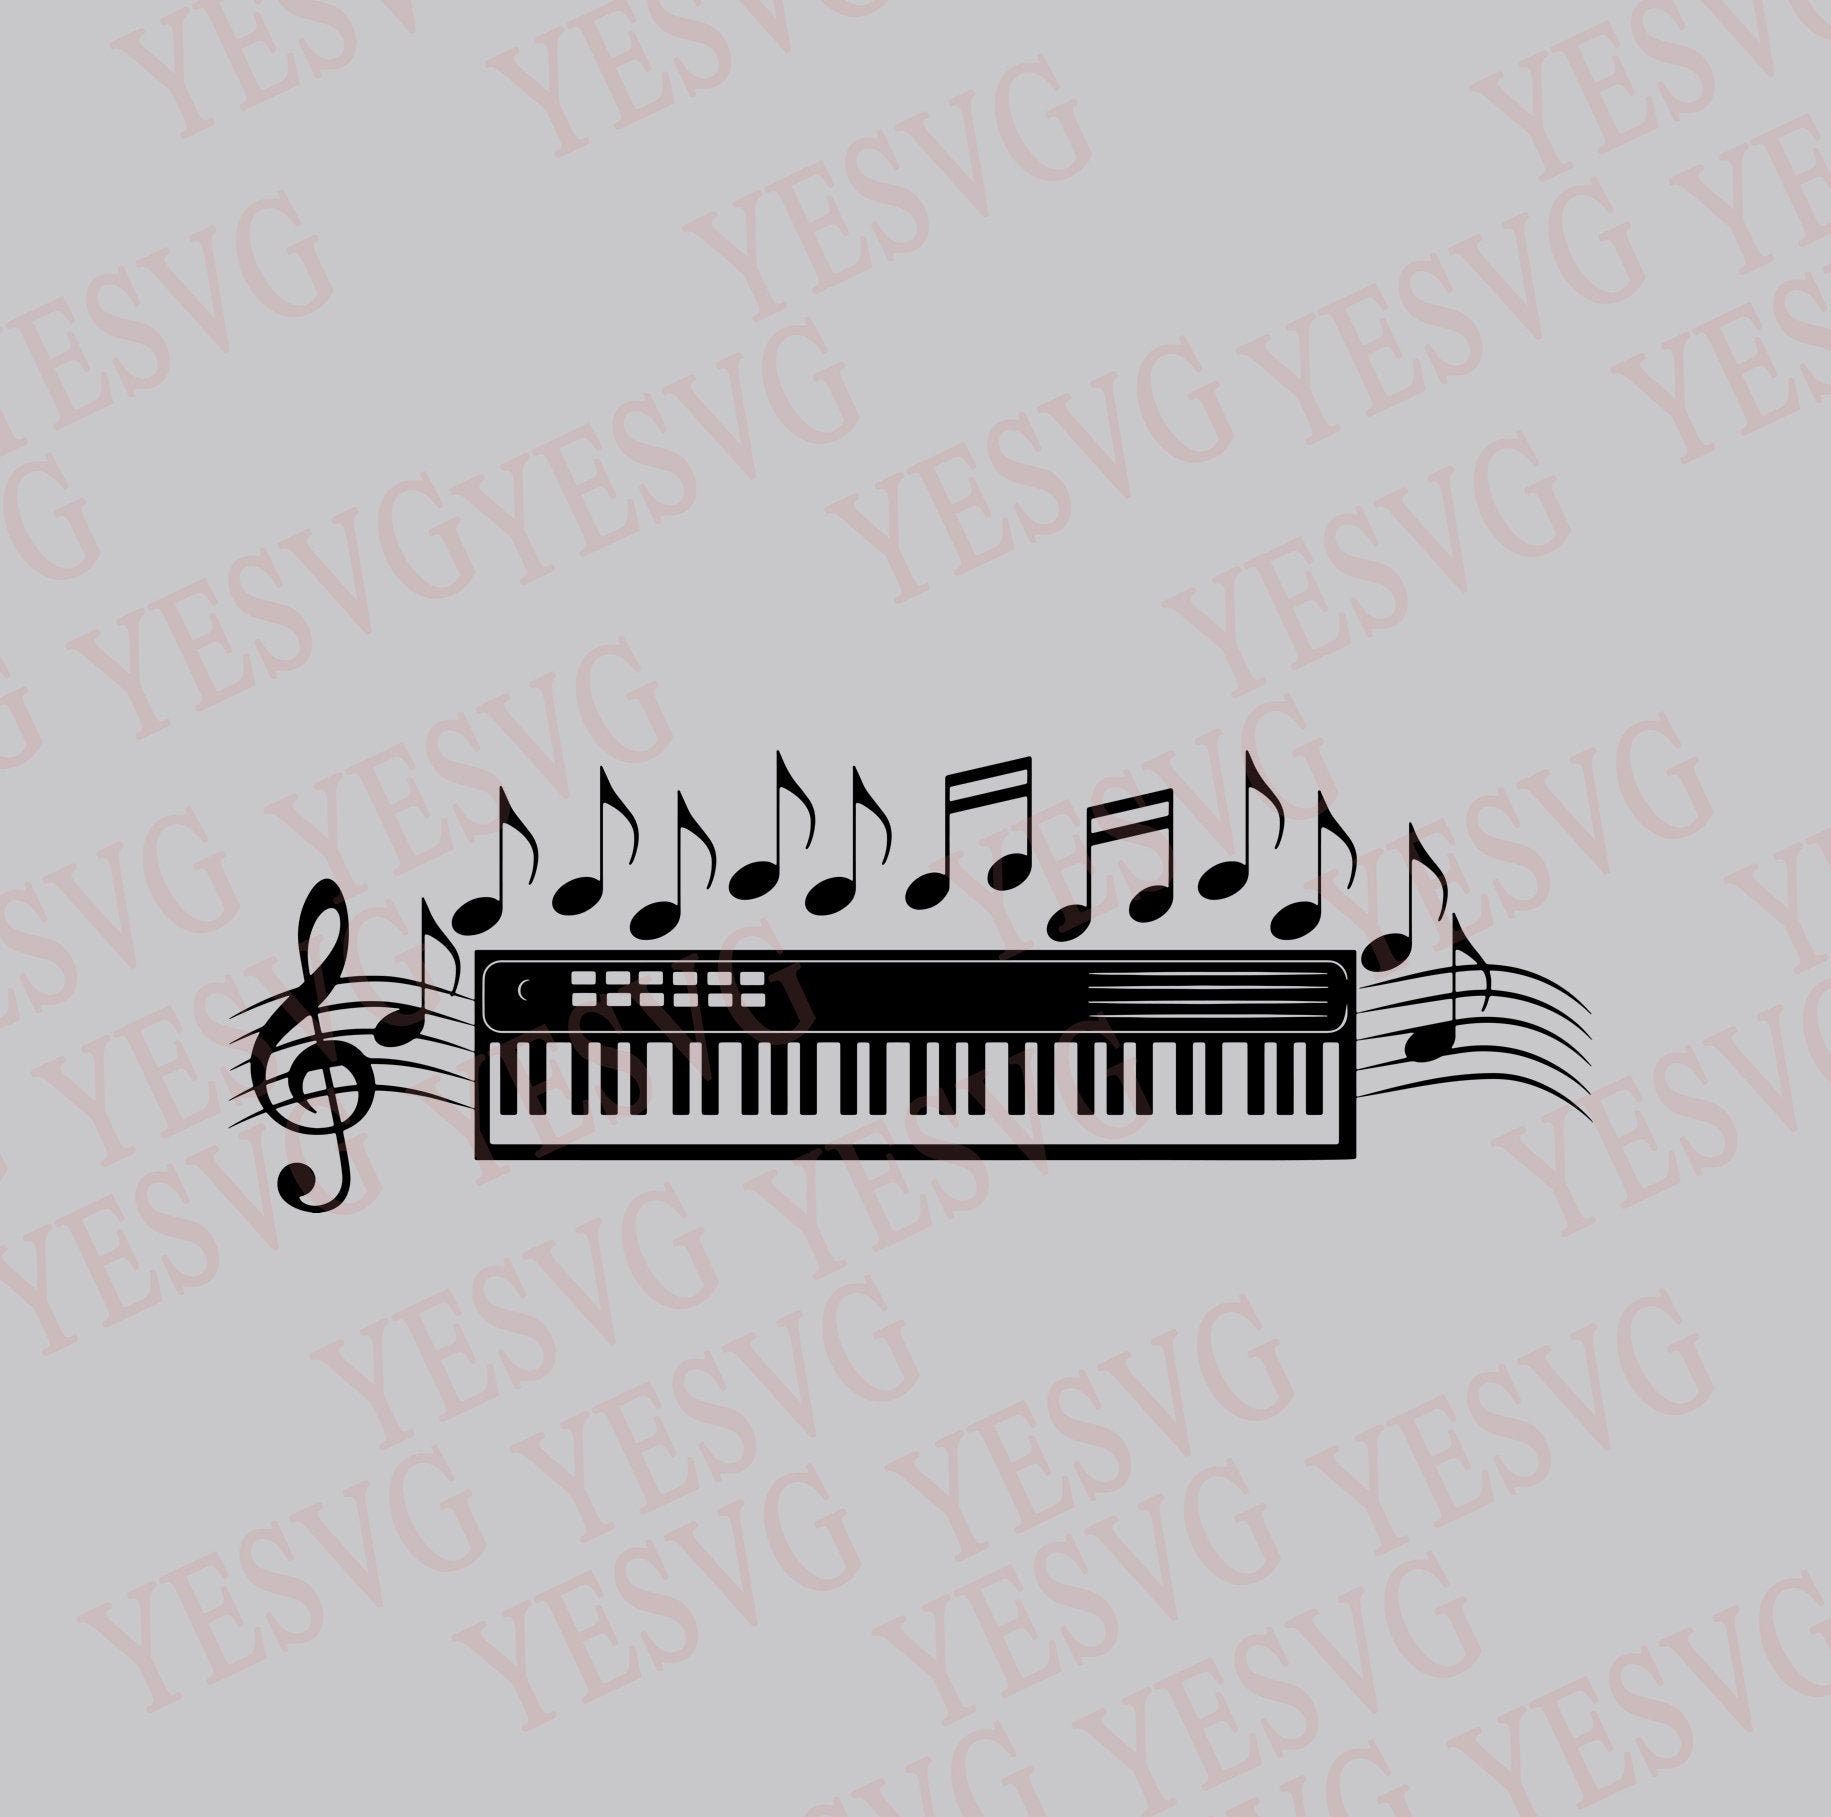 Synthesizer Flat Music Piano Keyboard Vector : image vectorielle